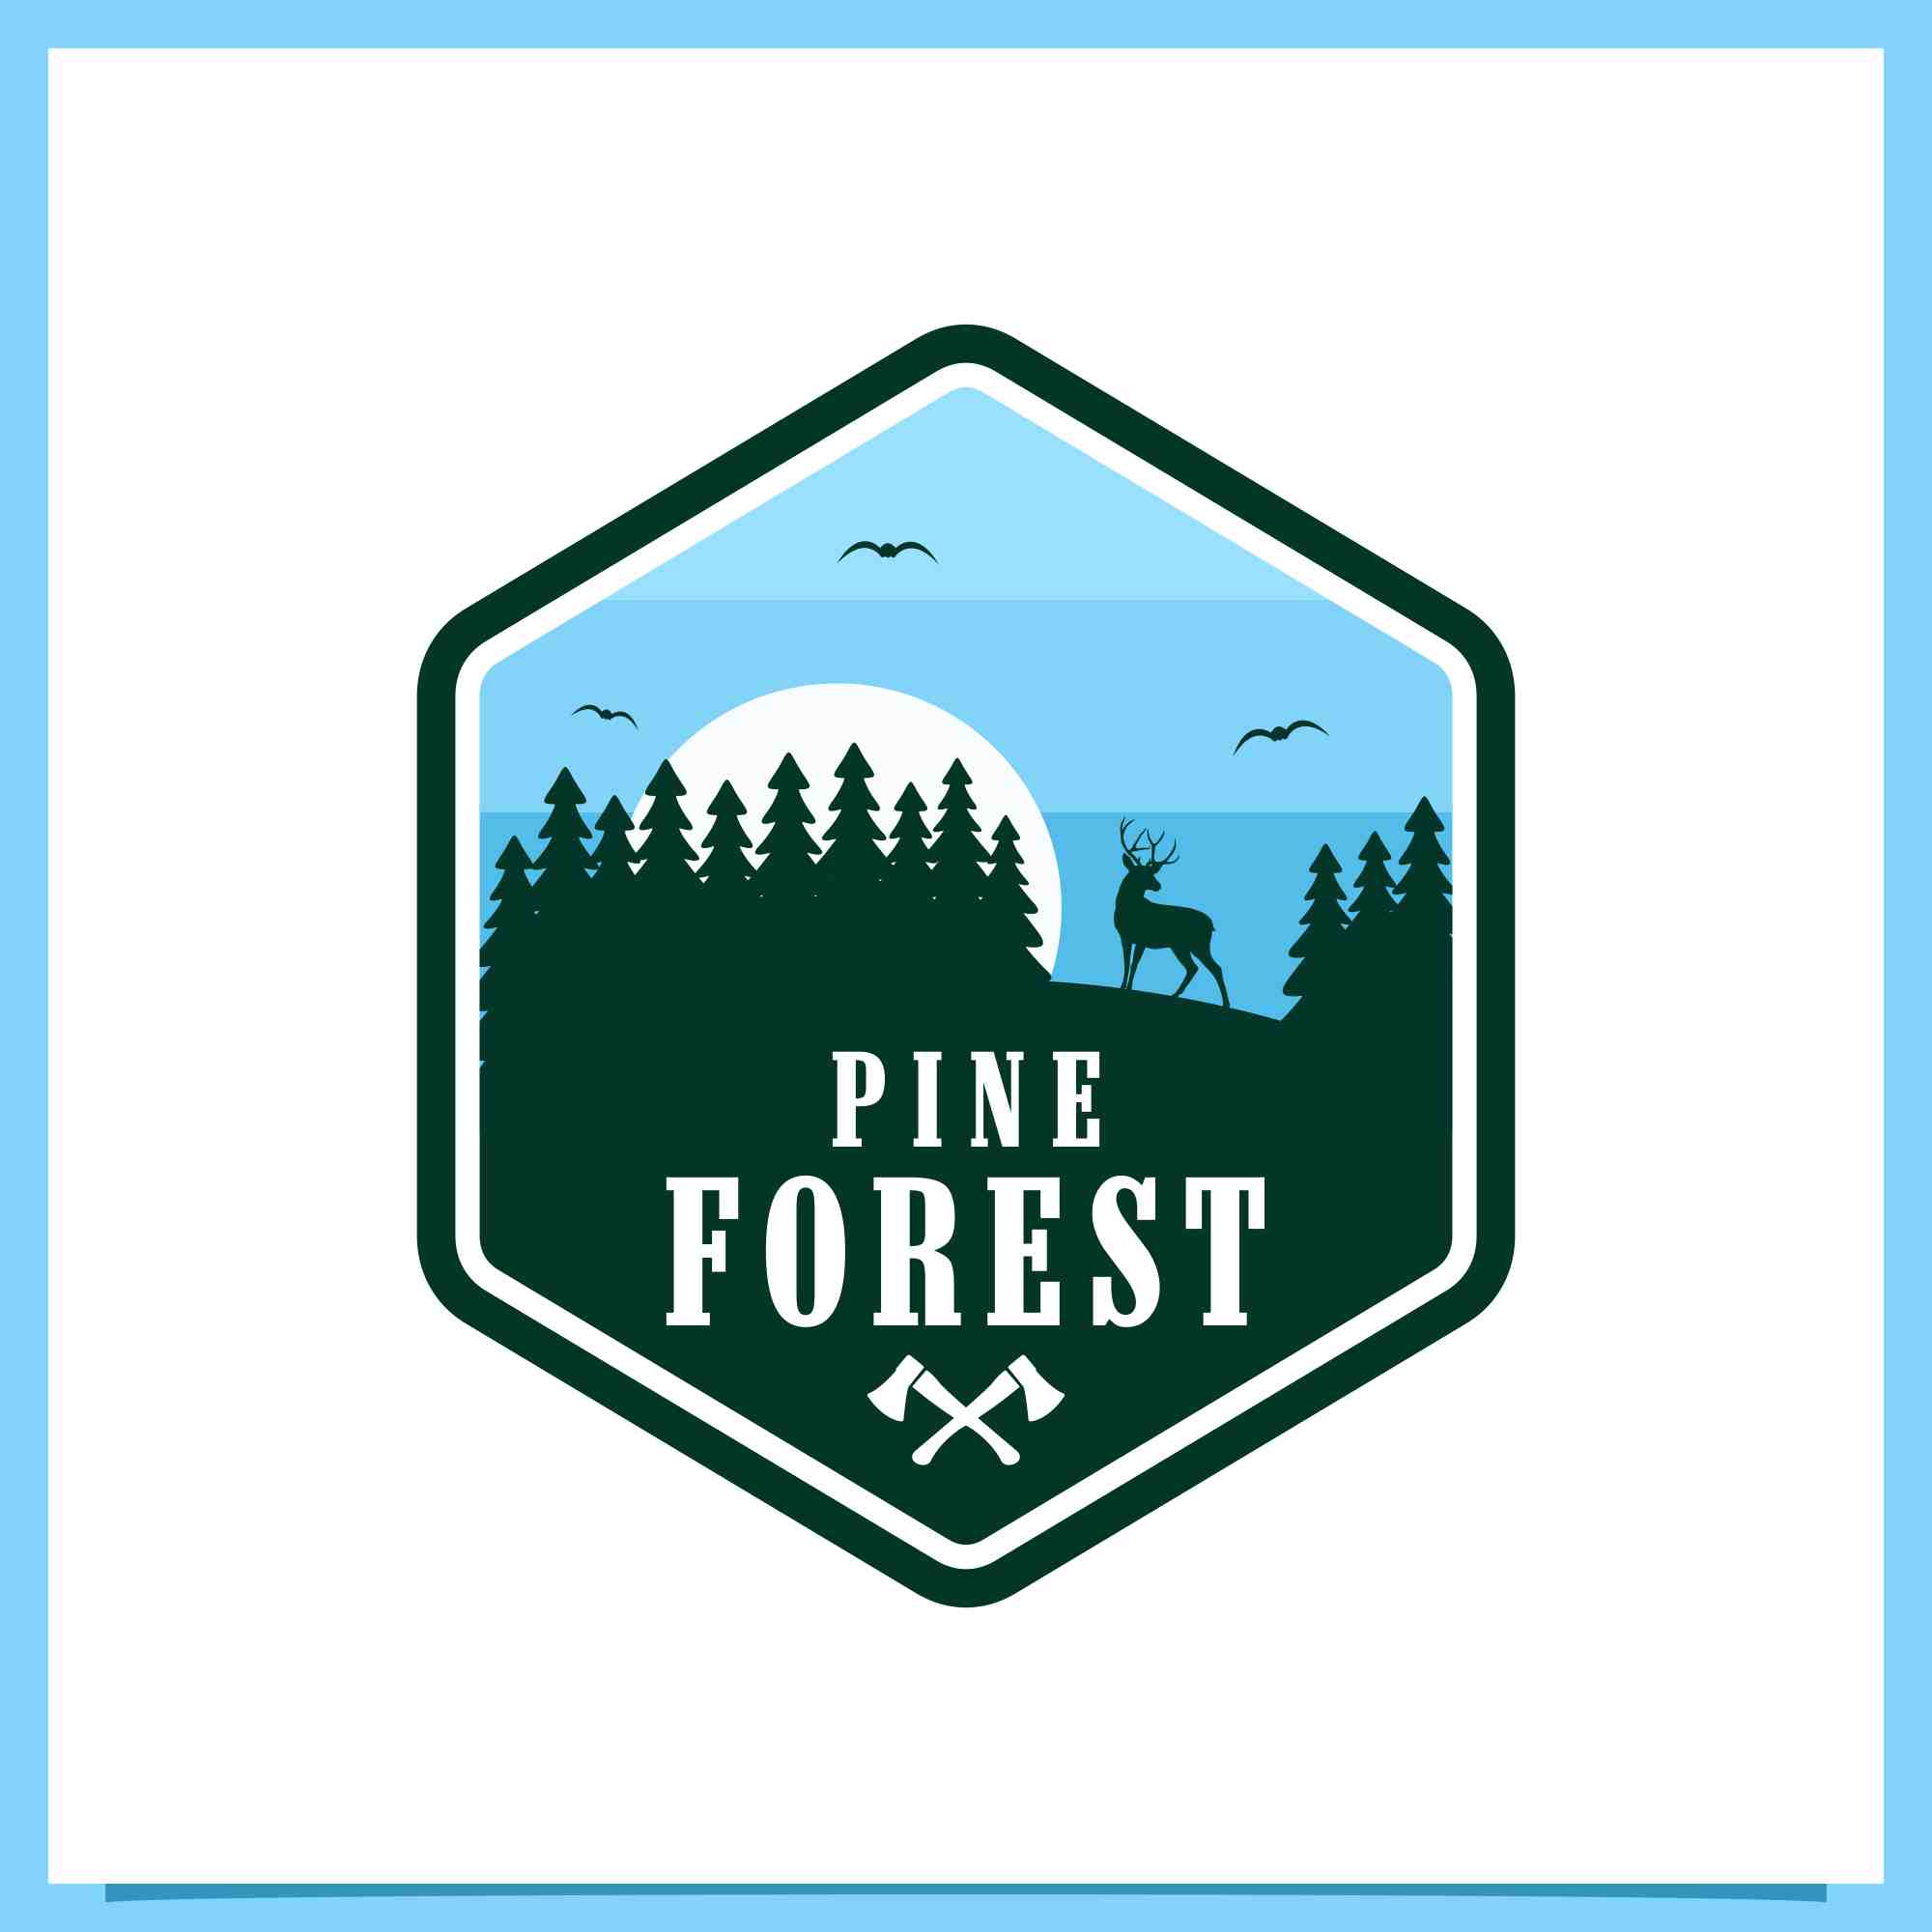 pine forest badge logo collection 3 442